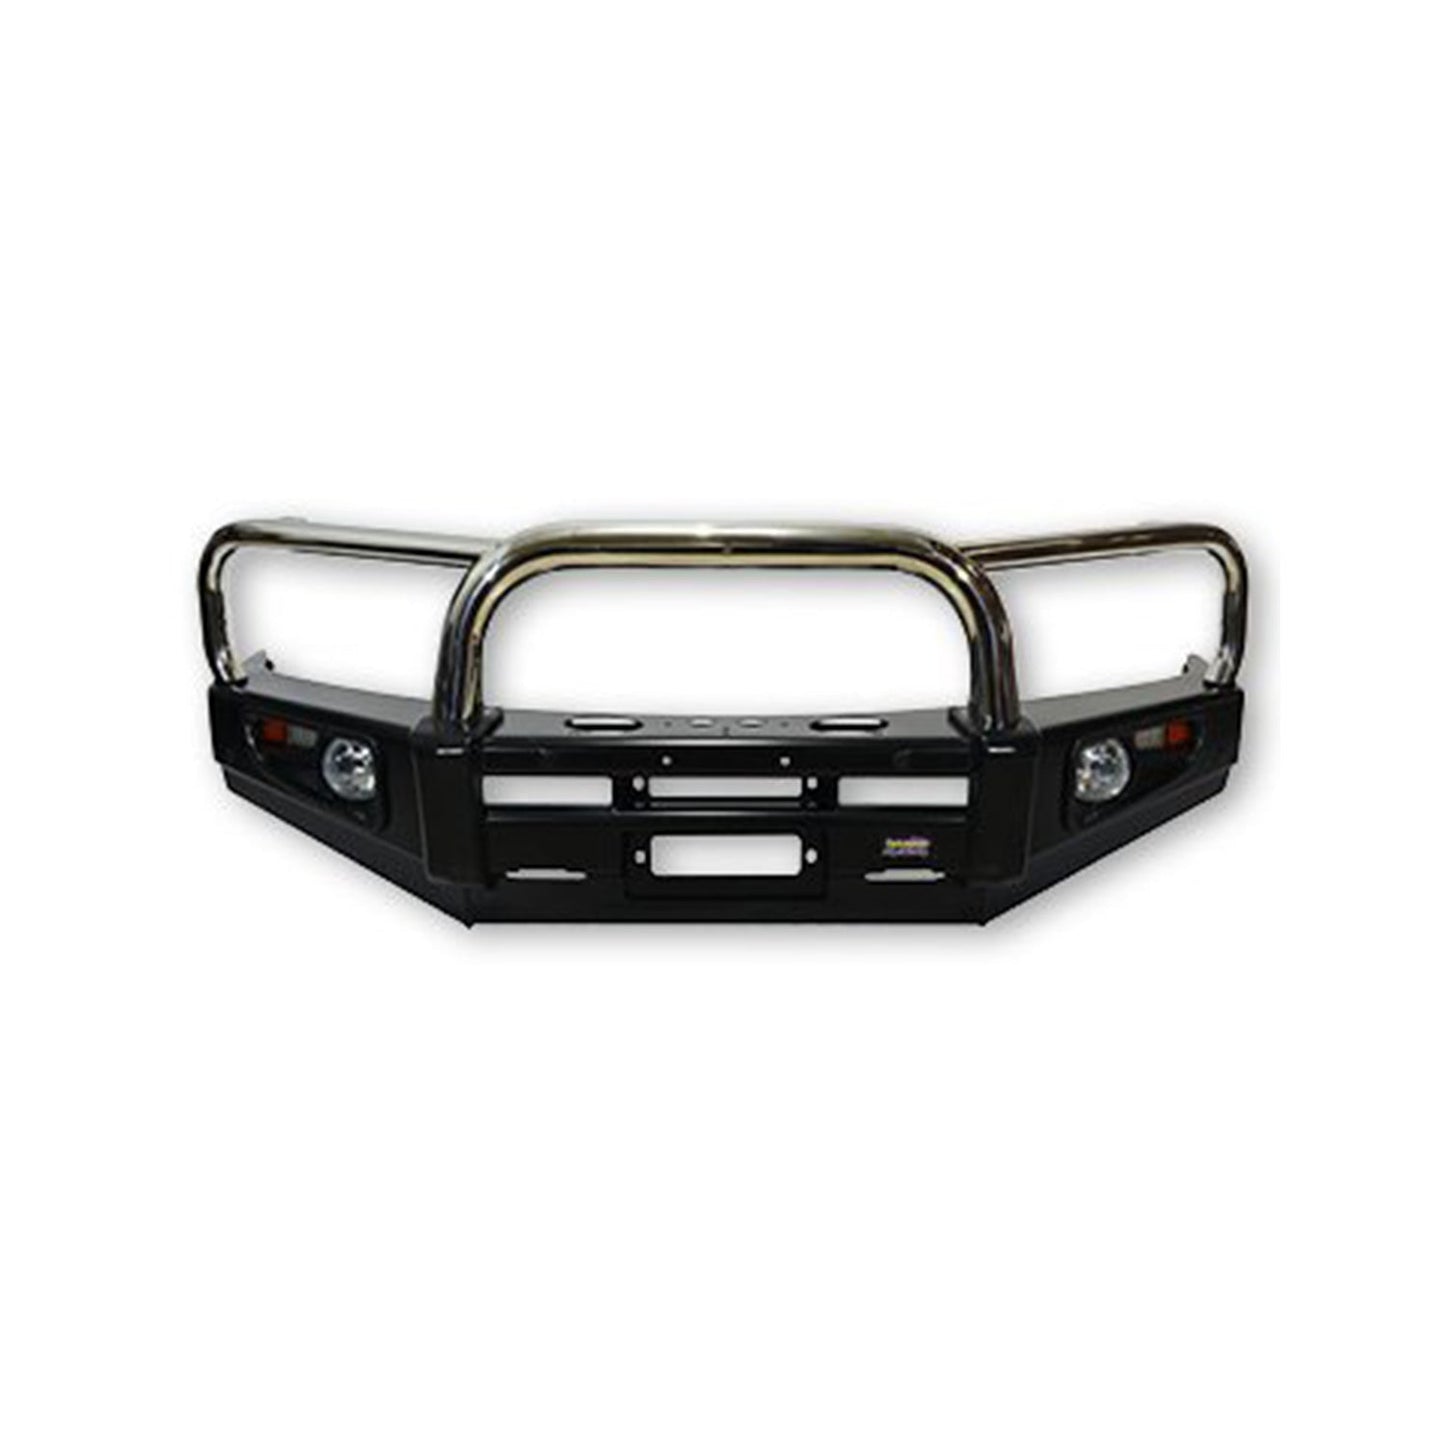 Dobinsons 4x4 Stainless Loop Deluxe Bullbar for Toyota Land Cruiser 200 Series 2008 to 2012 Only (Initial Release Models)(BU59-3659)